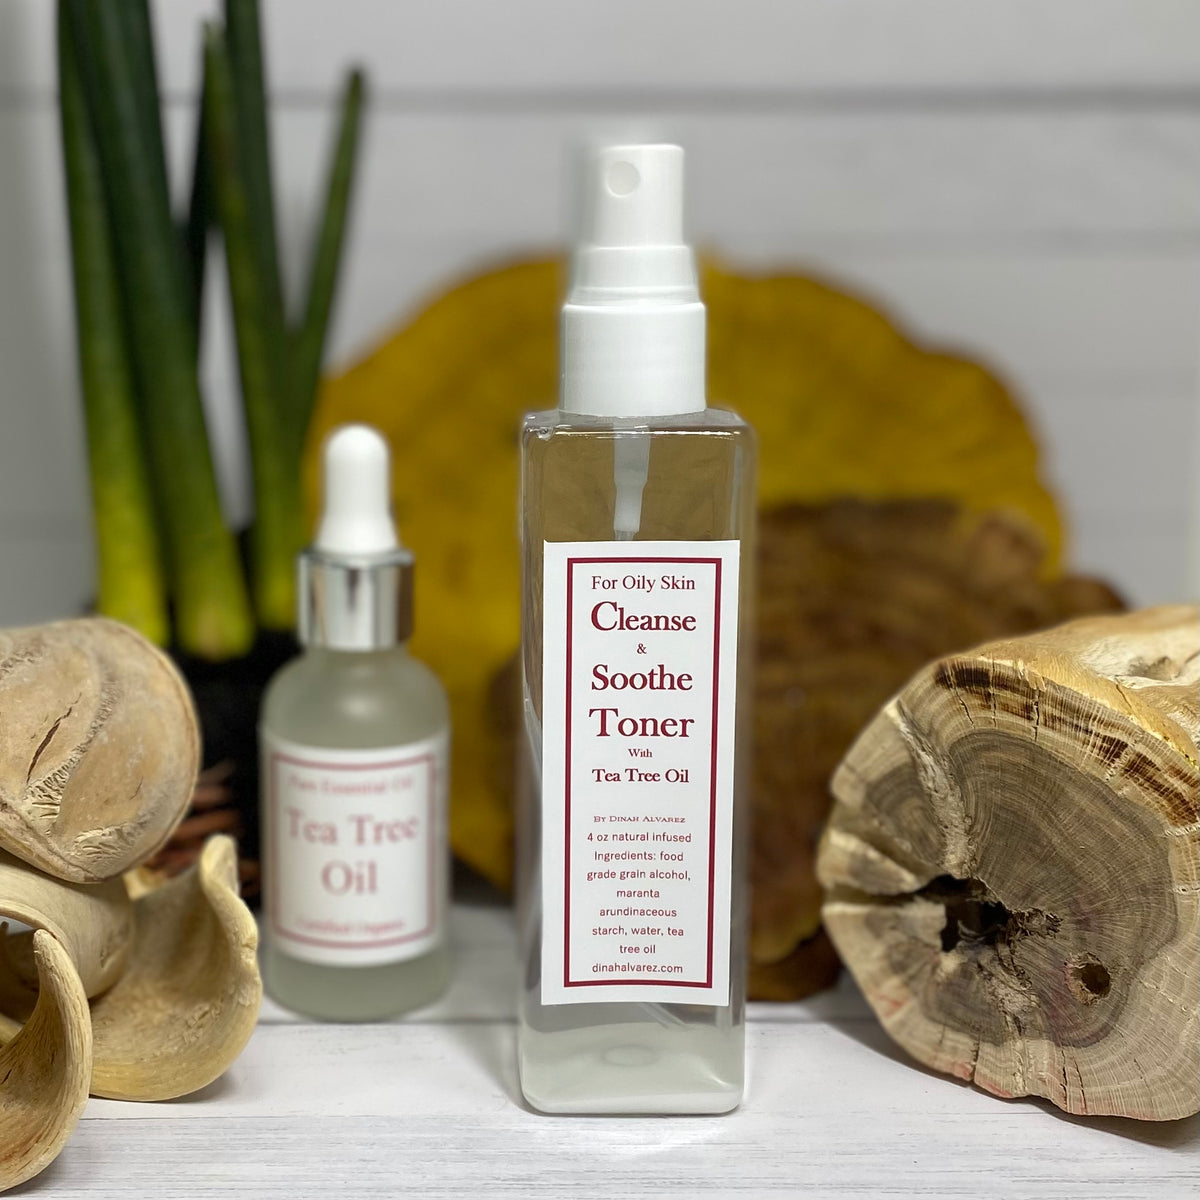 Cleanse & Soothe Toner with Tea Tree Oil